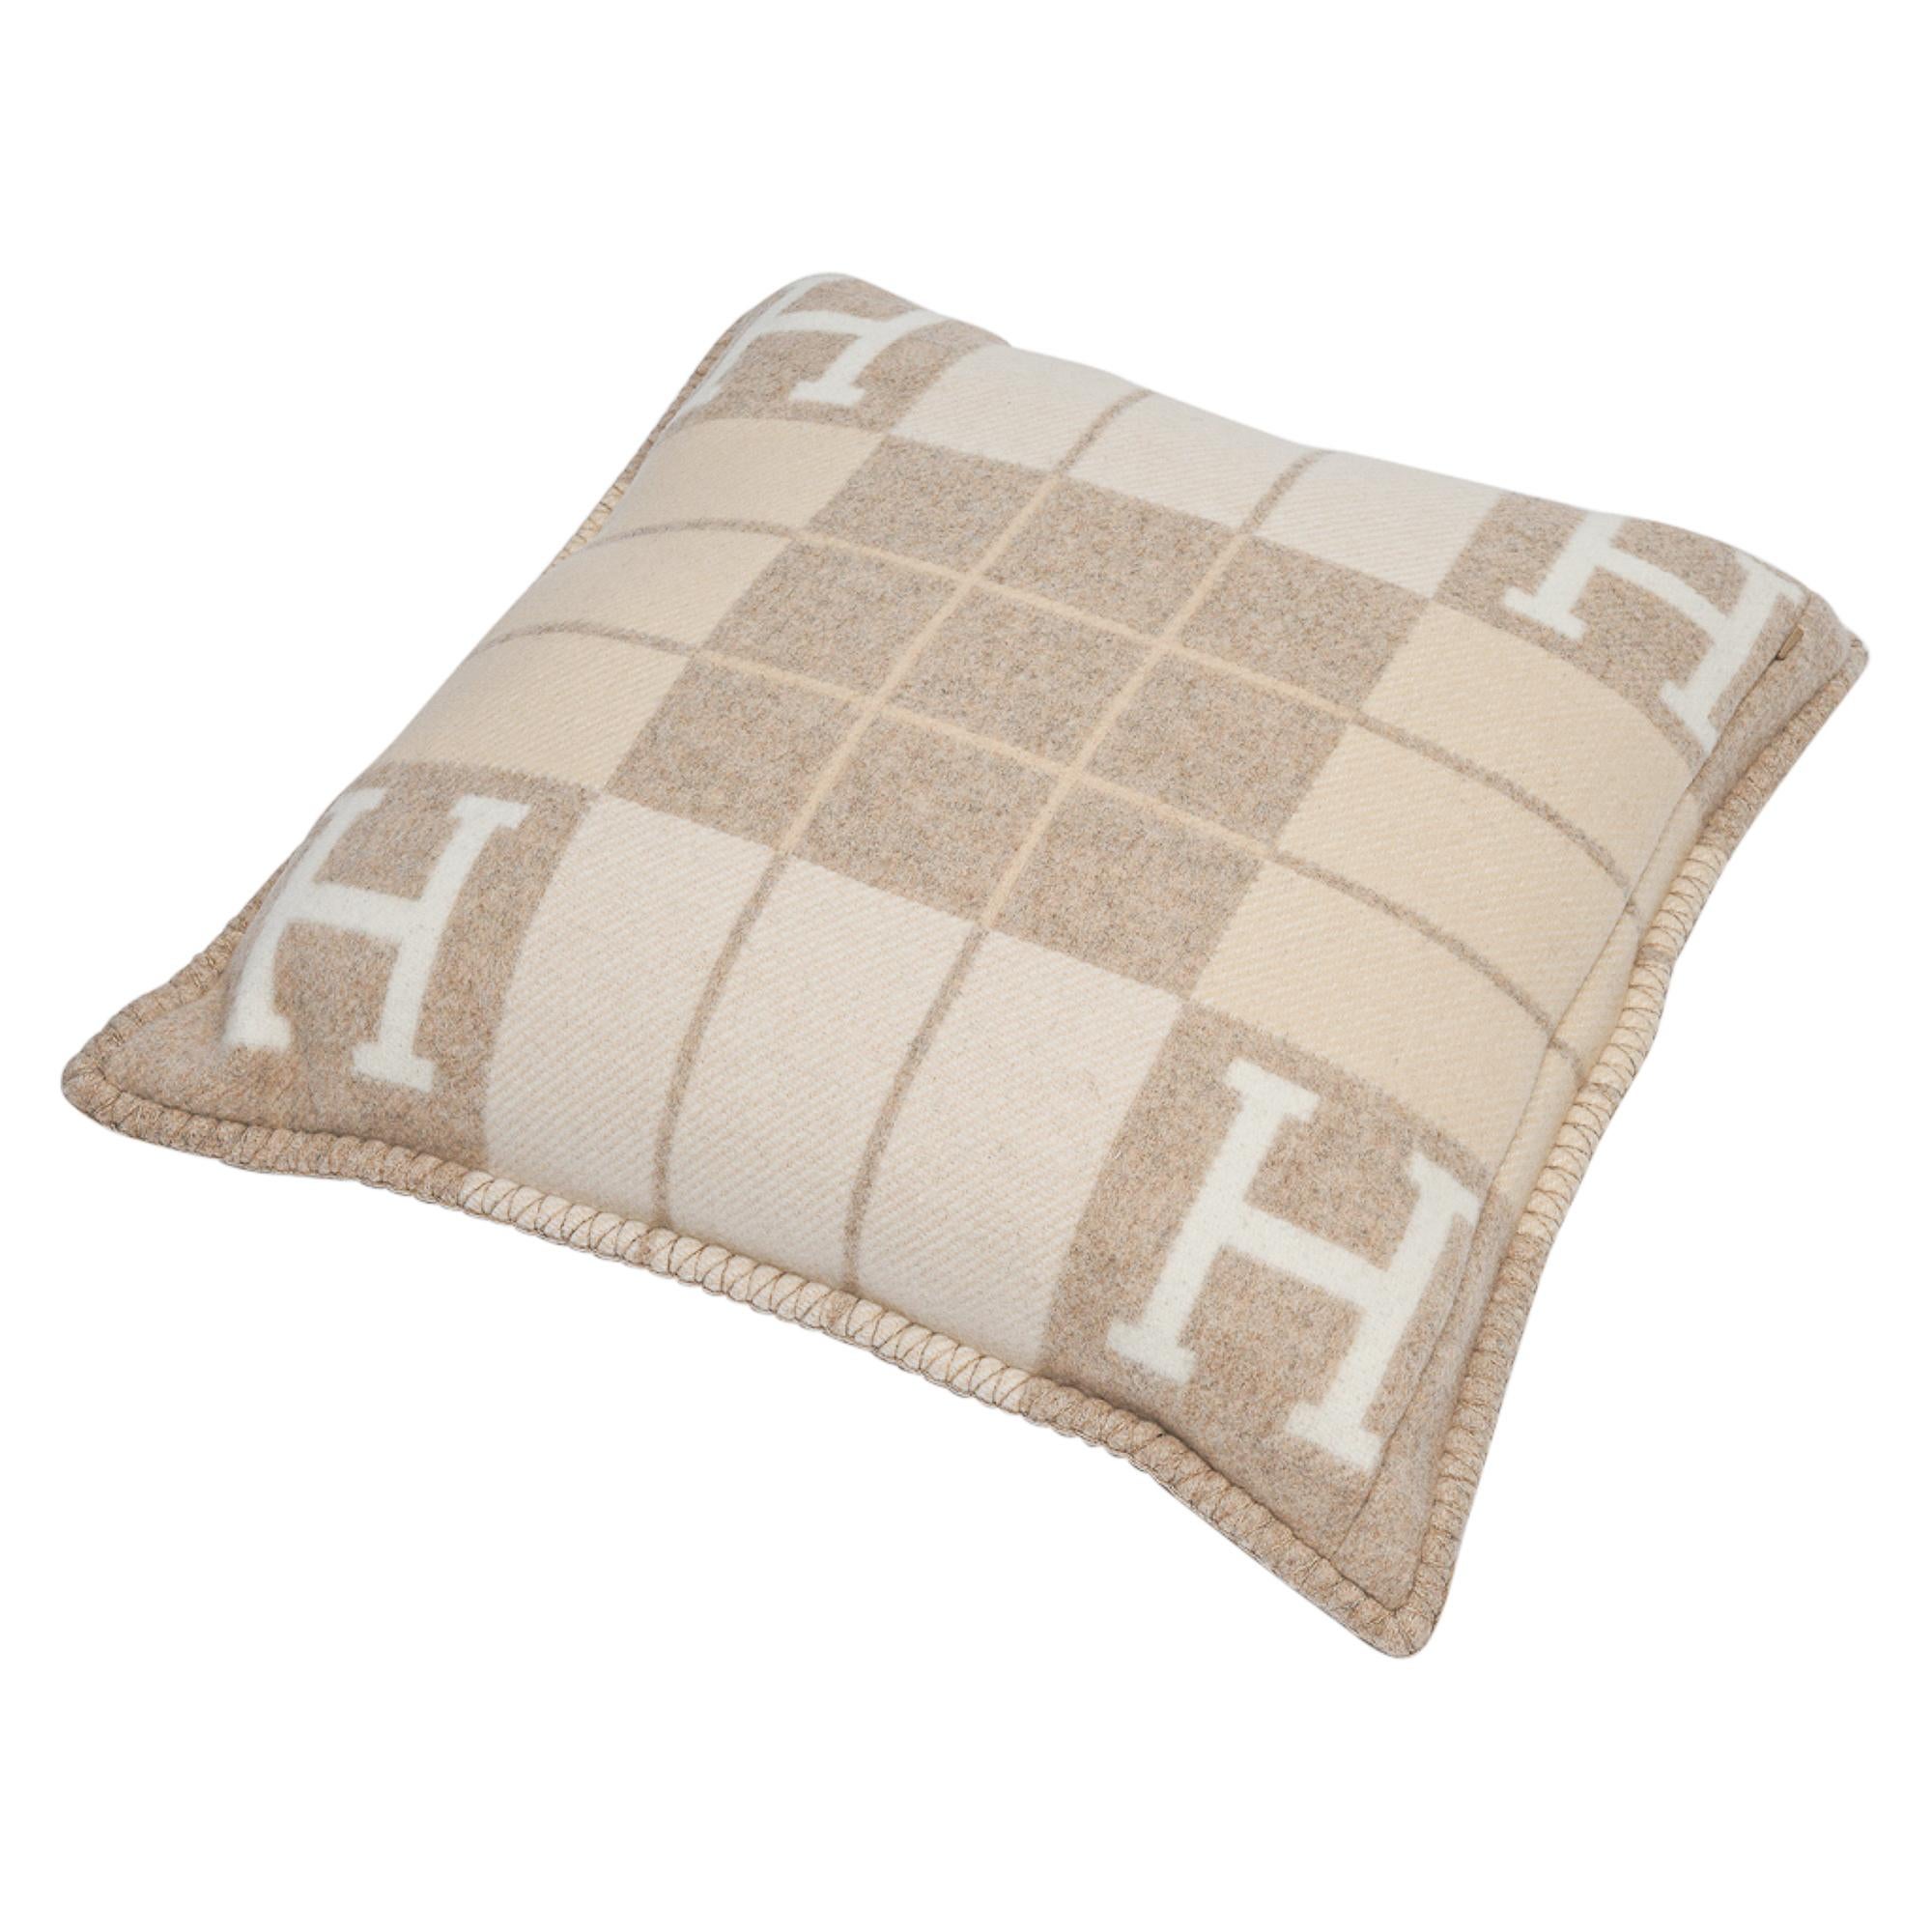 Beige Hermes Cushion Avalon III PM H Coco and Camomille Throw Pillow New